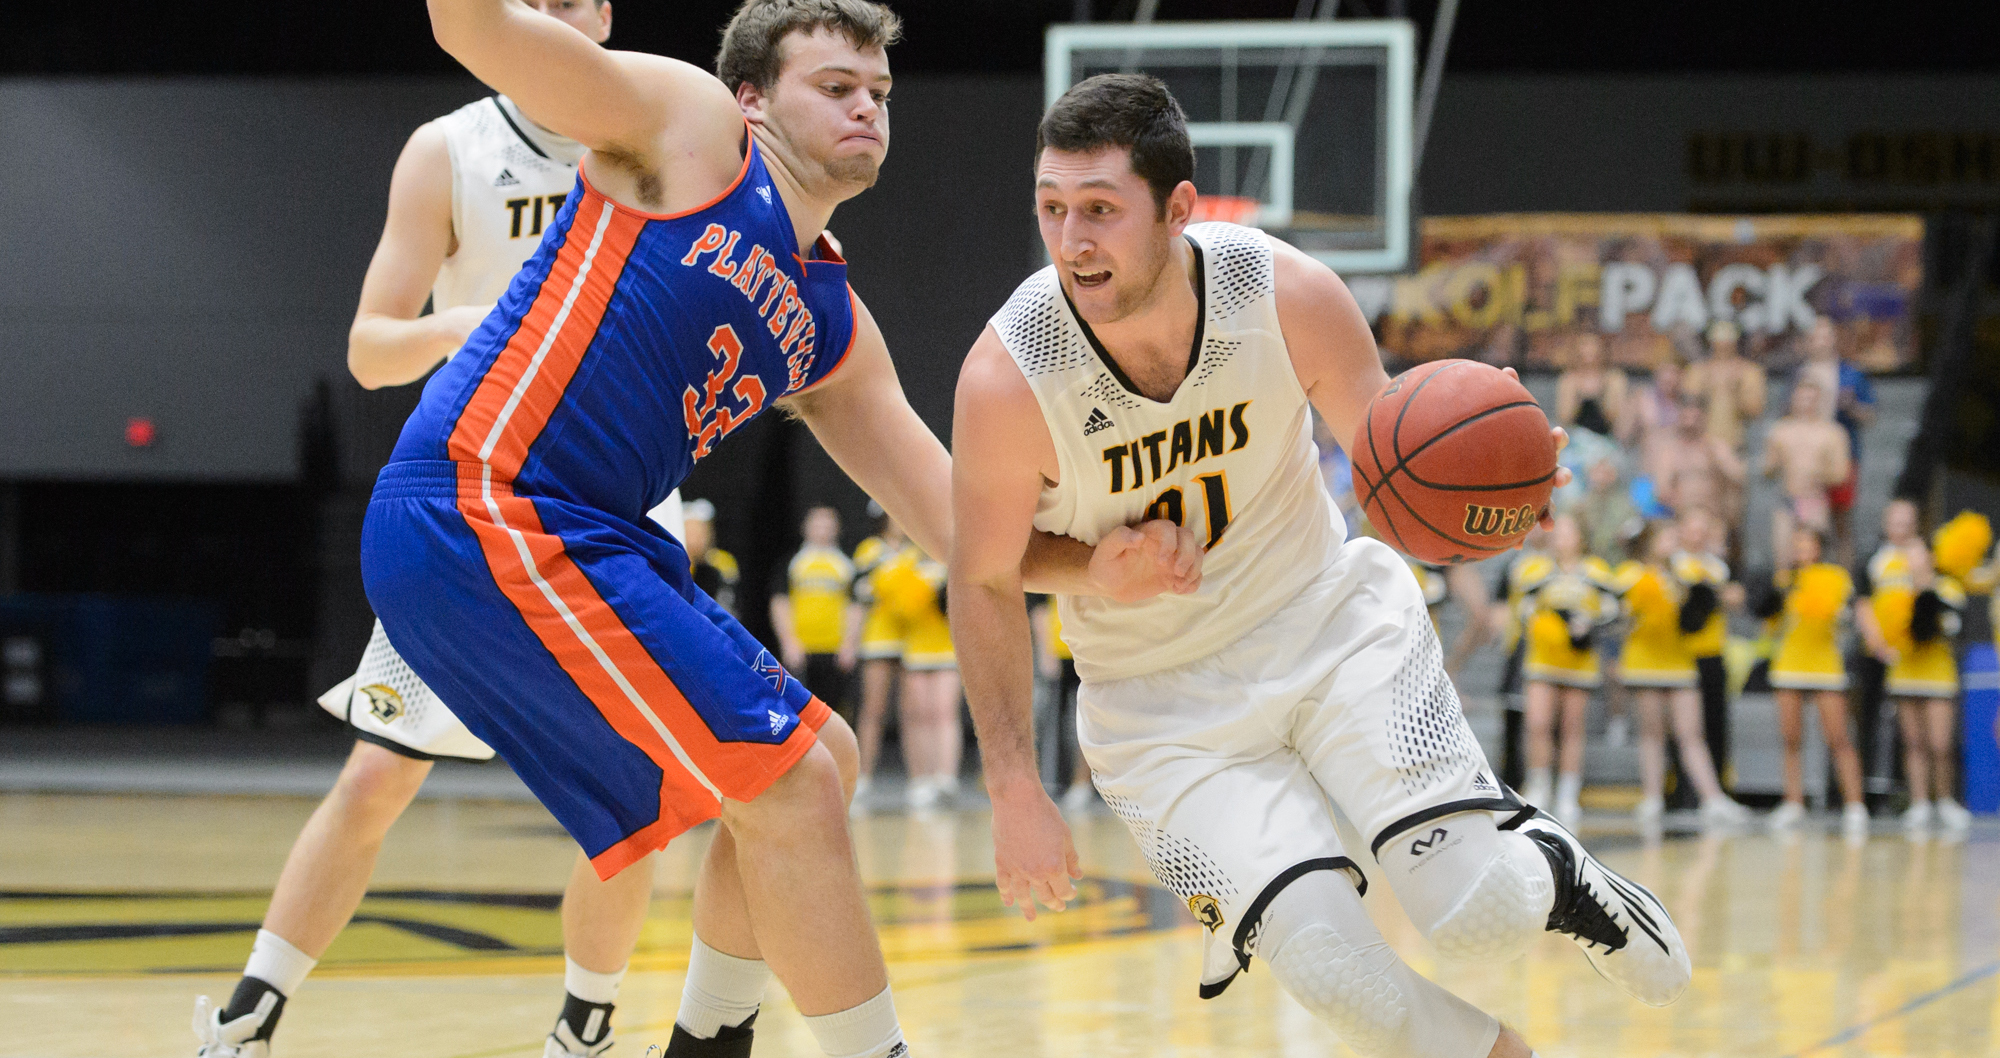 AJ Mueller scored a season-high 13 points while recording three steals and two rebounds.